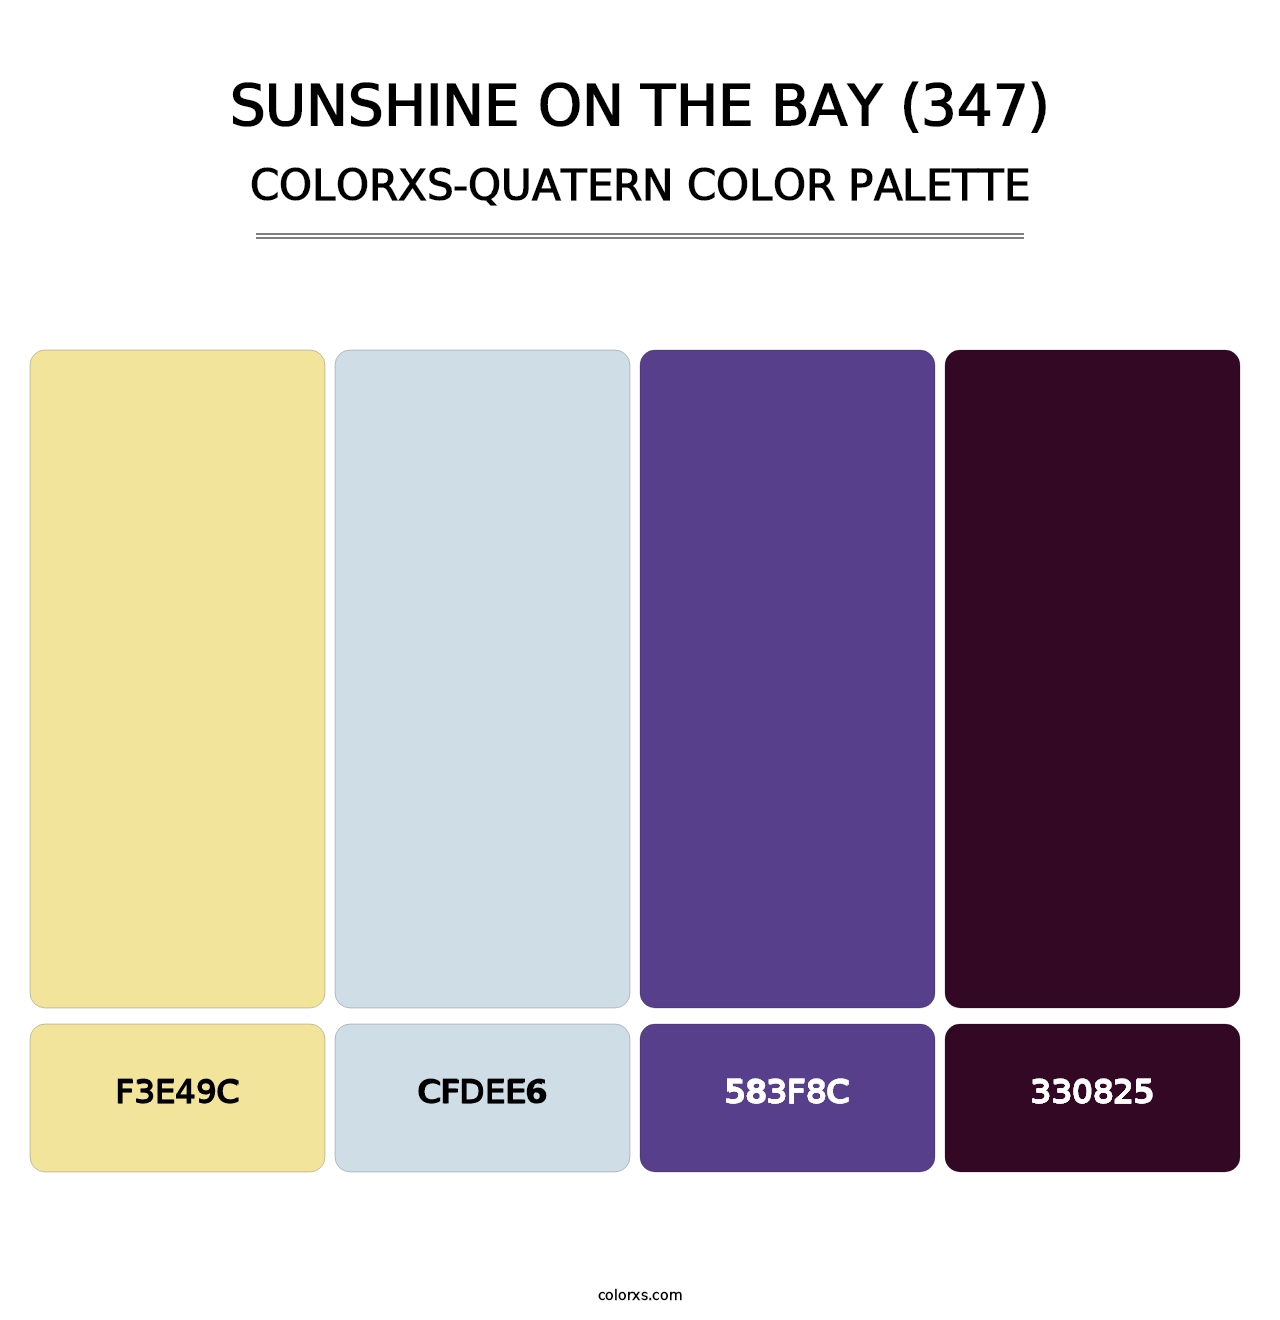 Sunshine on the Bay (347) - Colorxs Quatern Palette